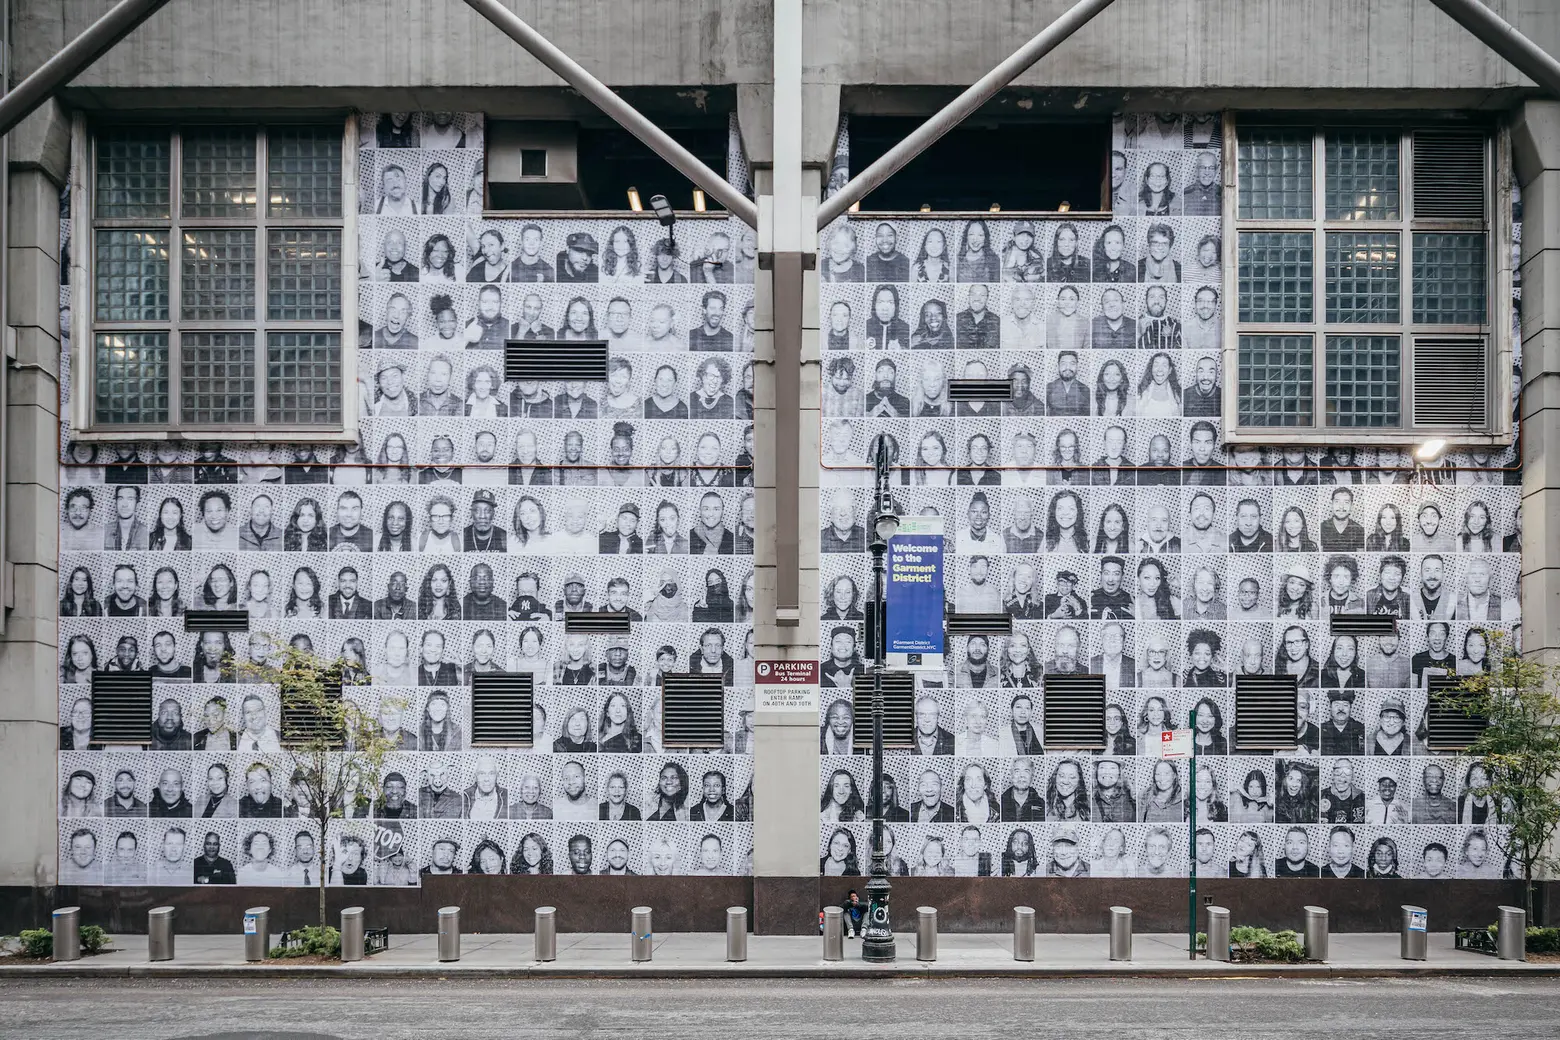 The faces of 1,200 New Yorkers now greet visitors outside of the Port Authority bus terminal